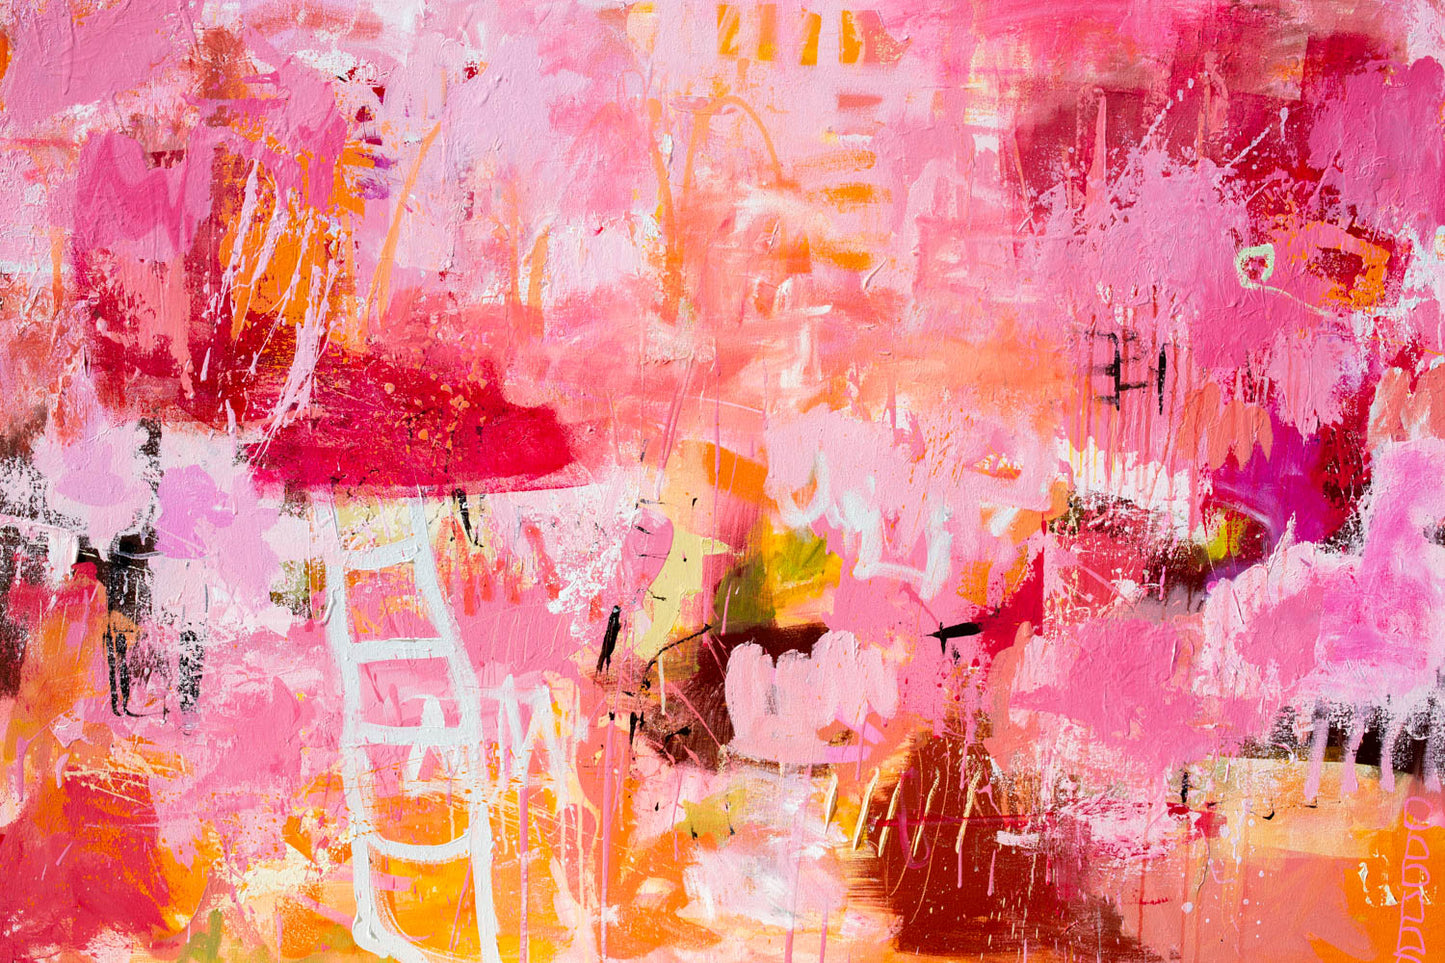 This Girl Is On Fire - Original Abstract Painting by Australian Artist Rose Hewartson 153 x 103cm